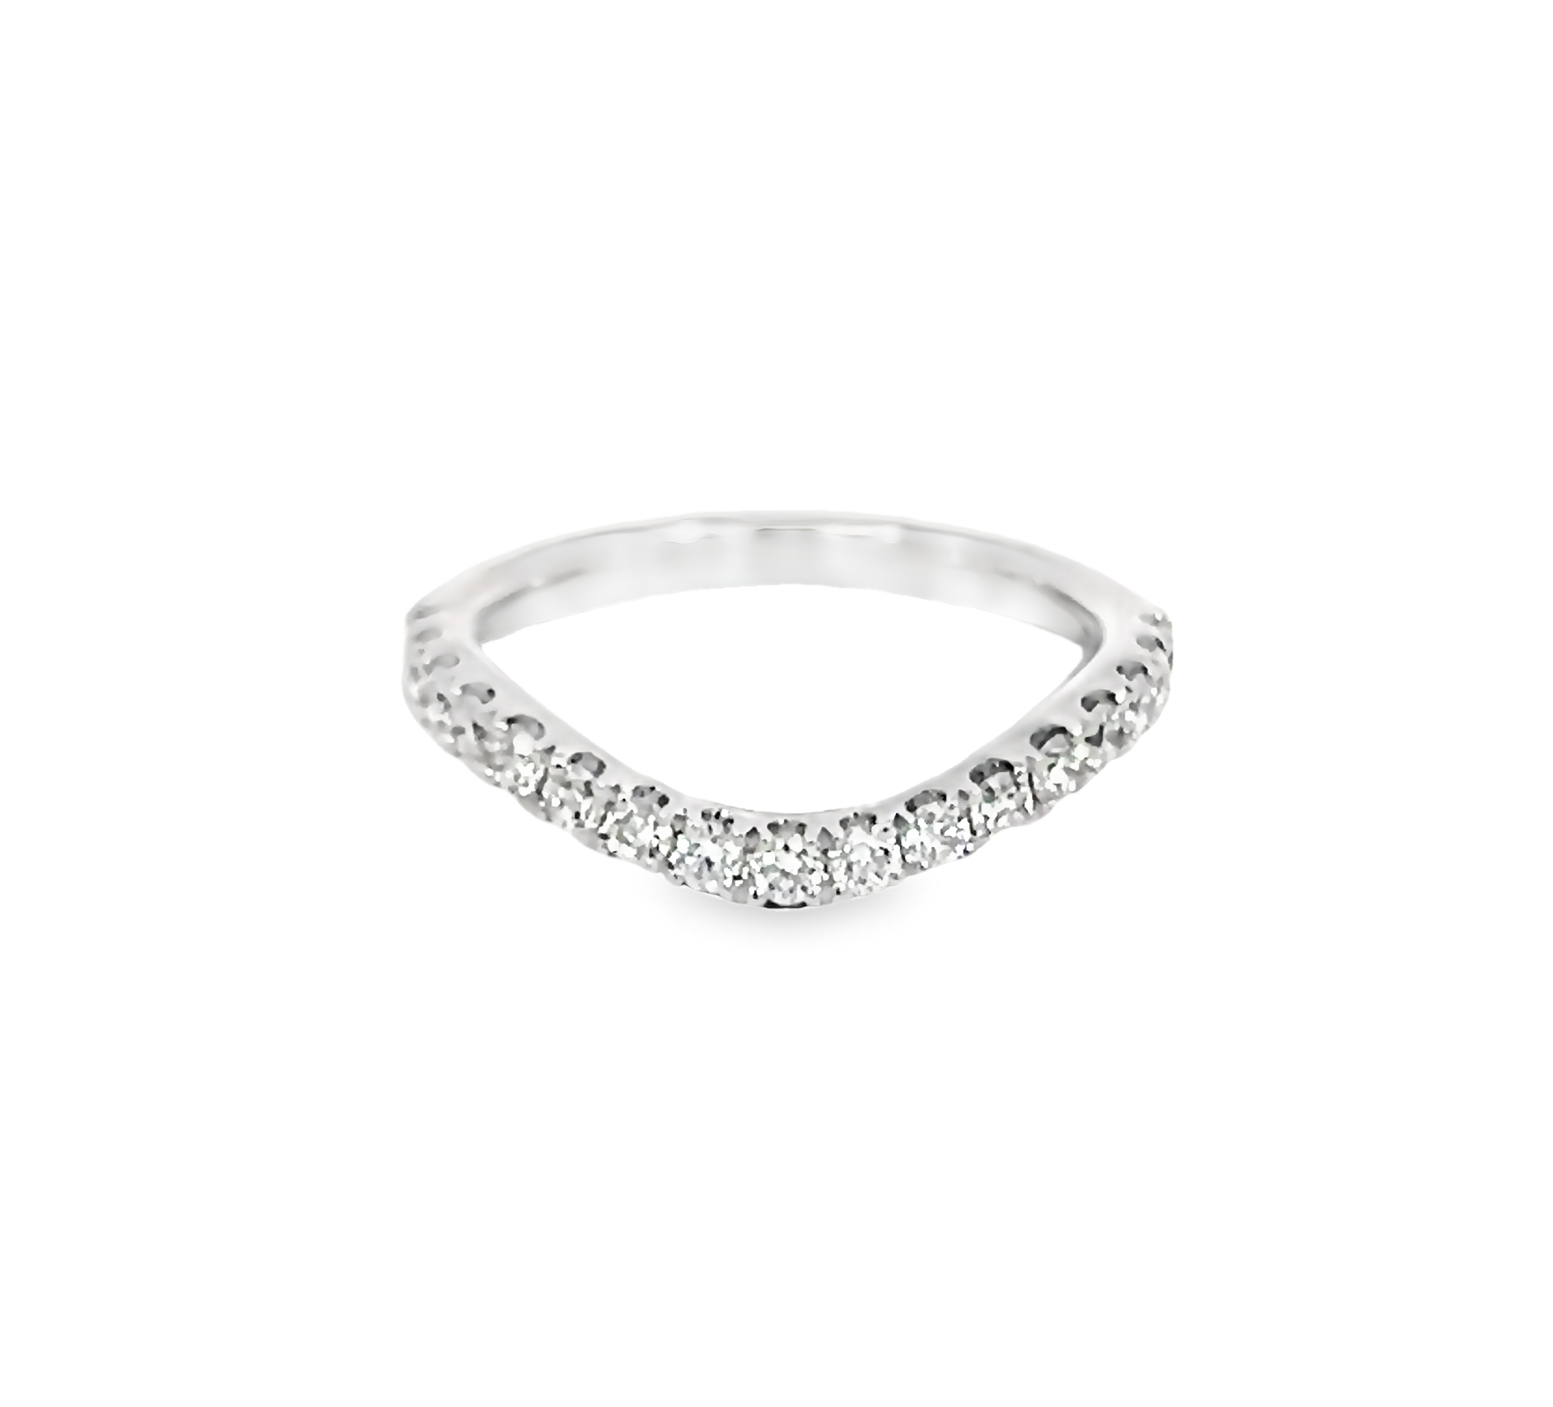 14k White Gold Curved Diamond Band